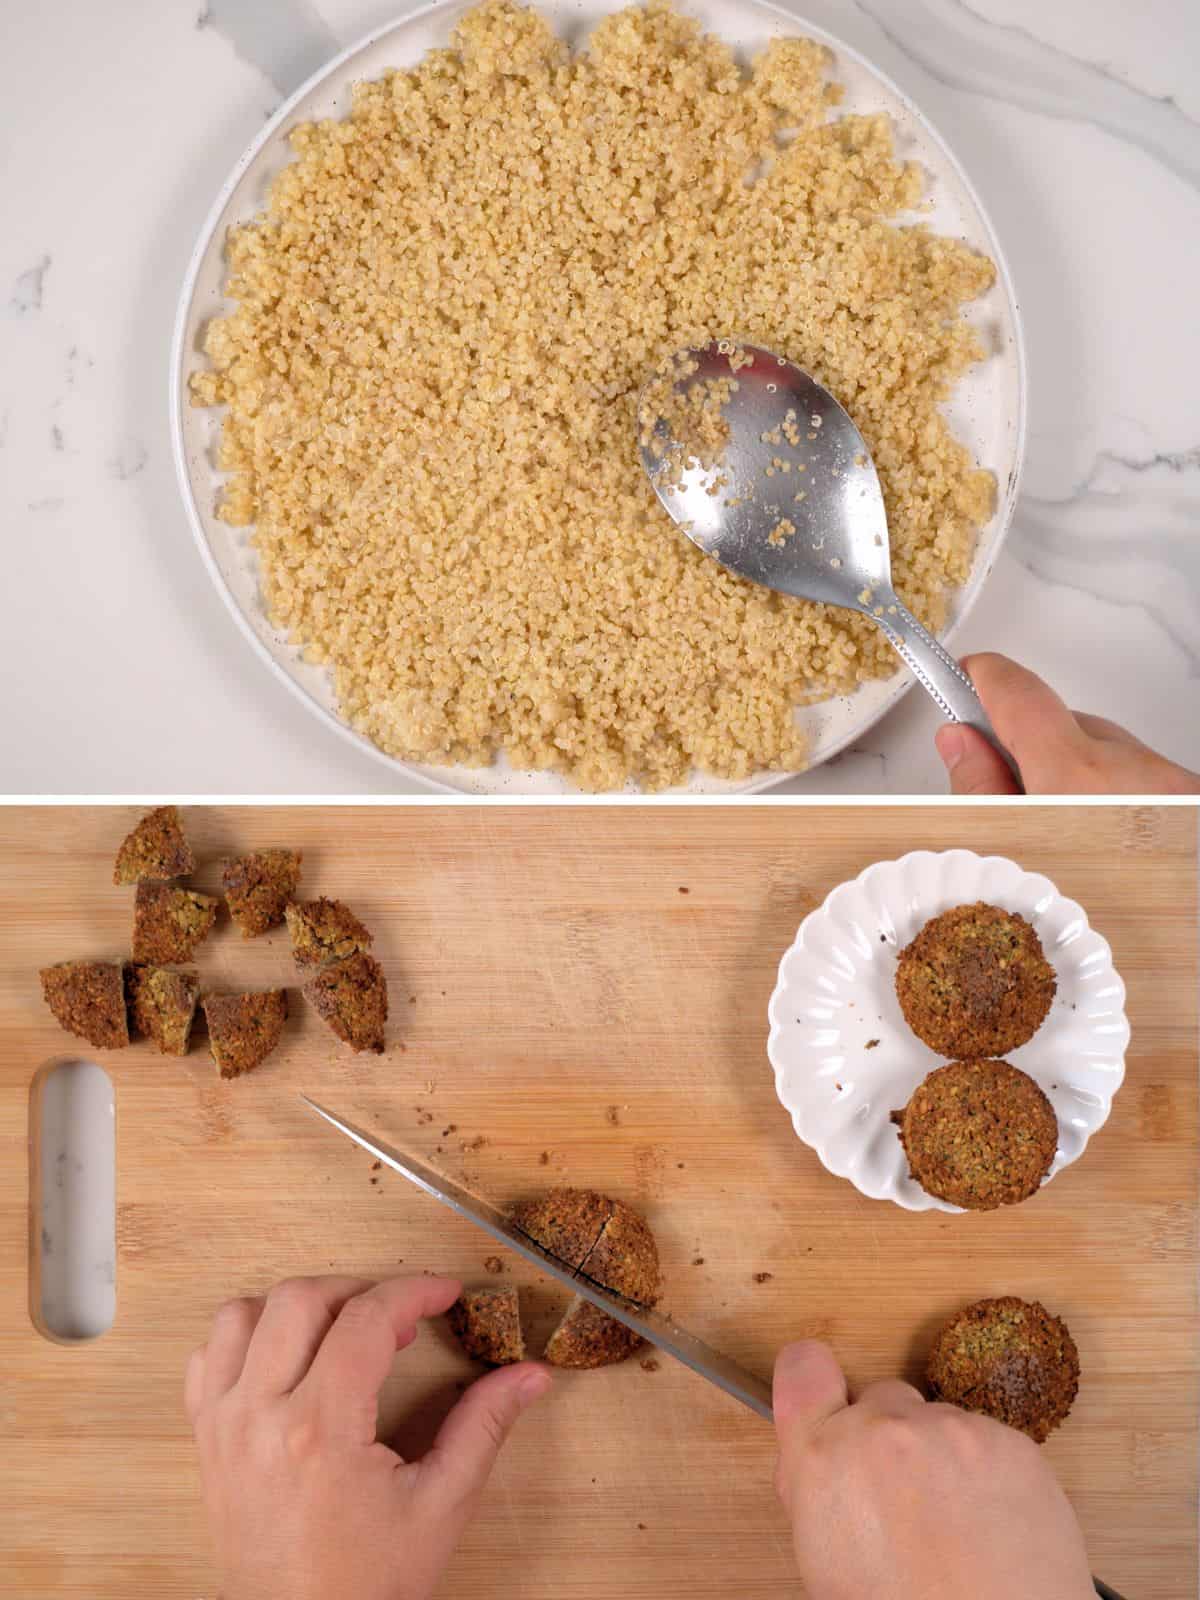 spreading cooked quinoa onto a plate and cutting falafel into quarters